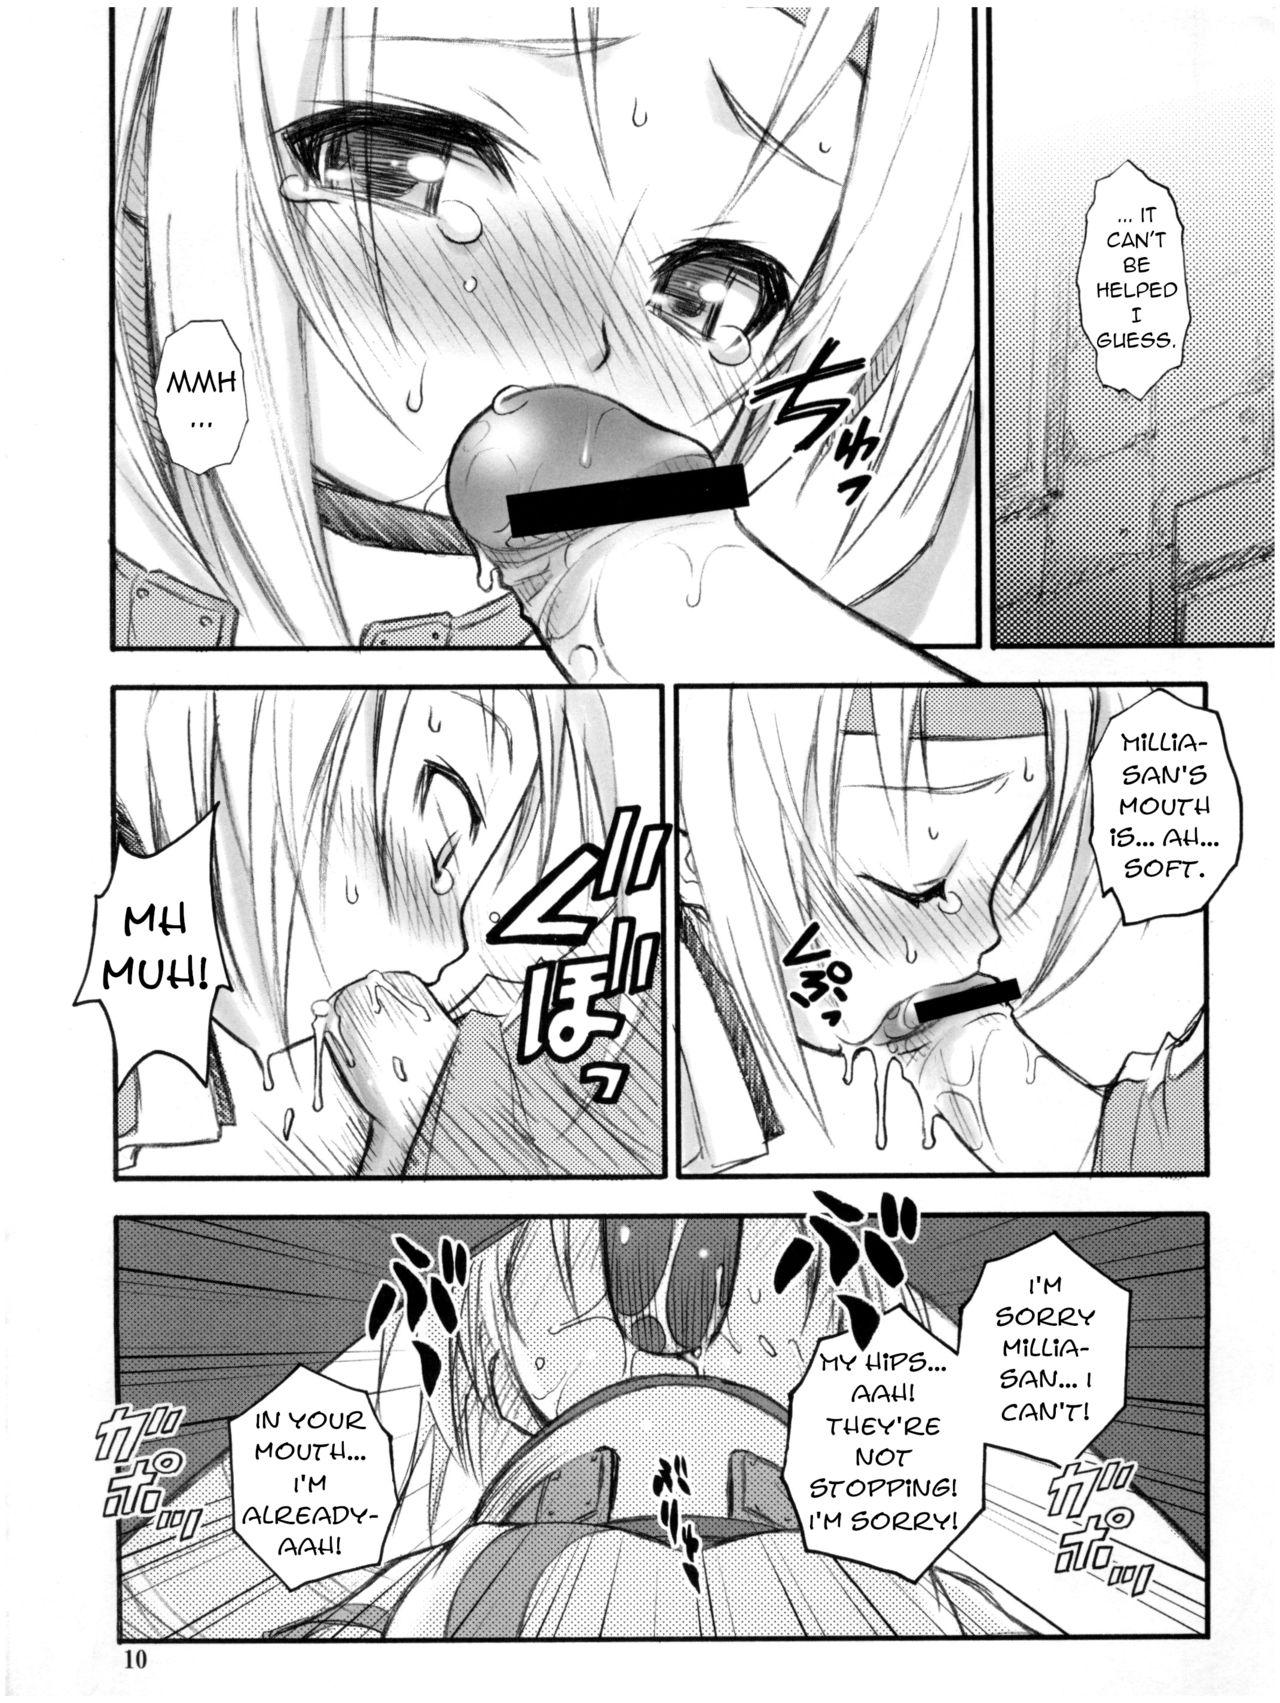 Sucking Dick Anone. - Guilty gear Romantic - Page 10